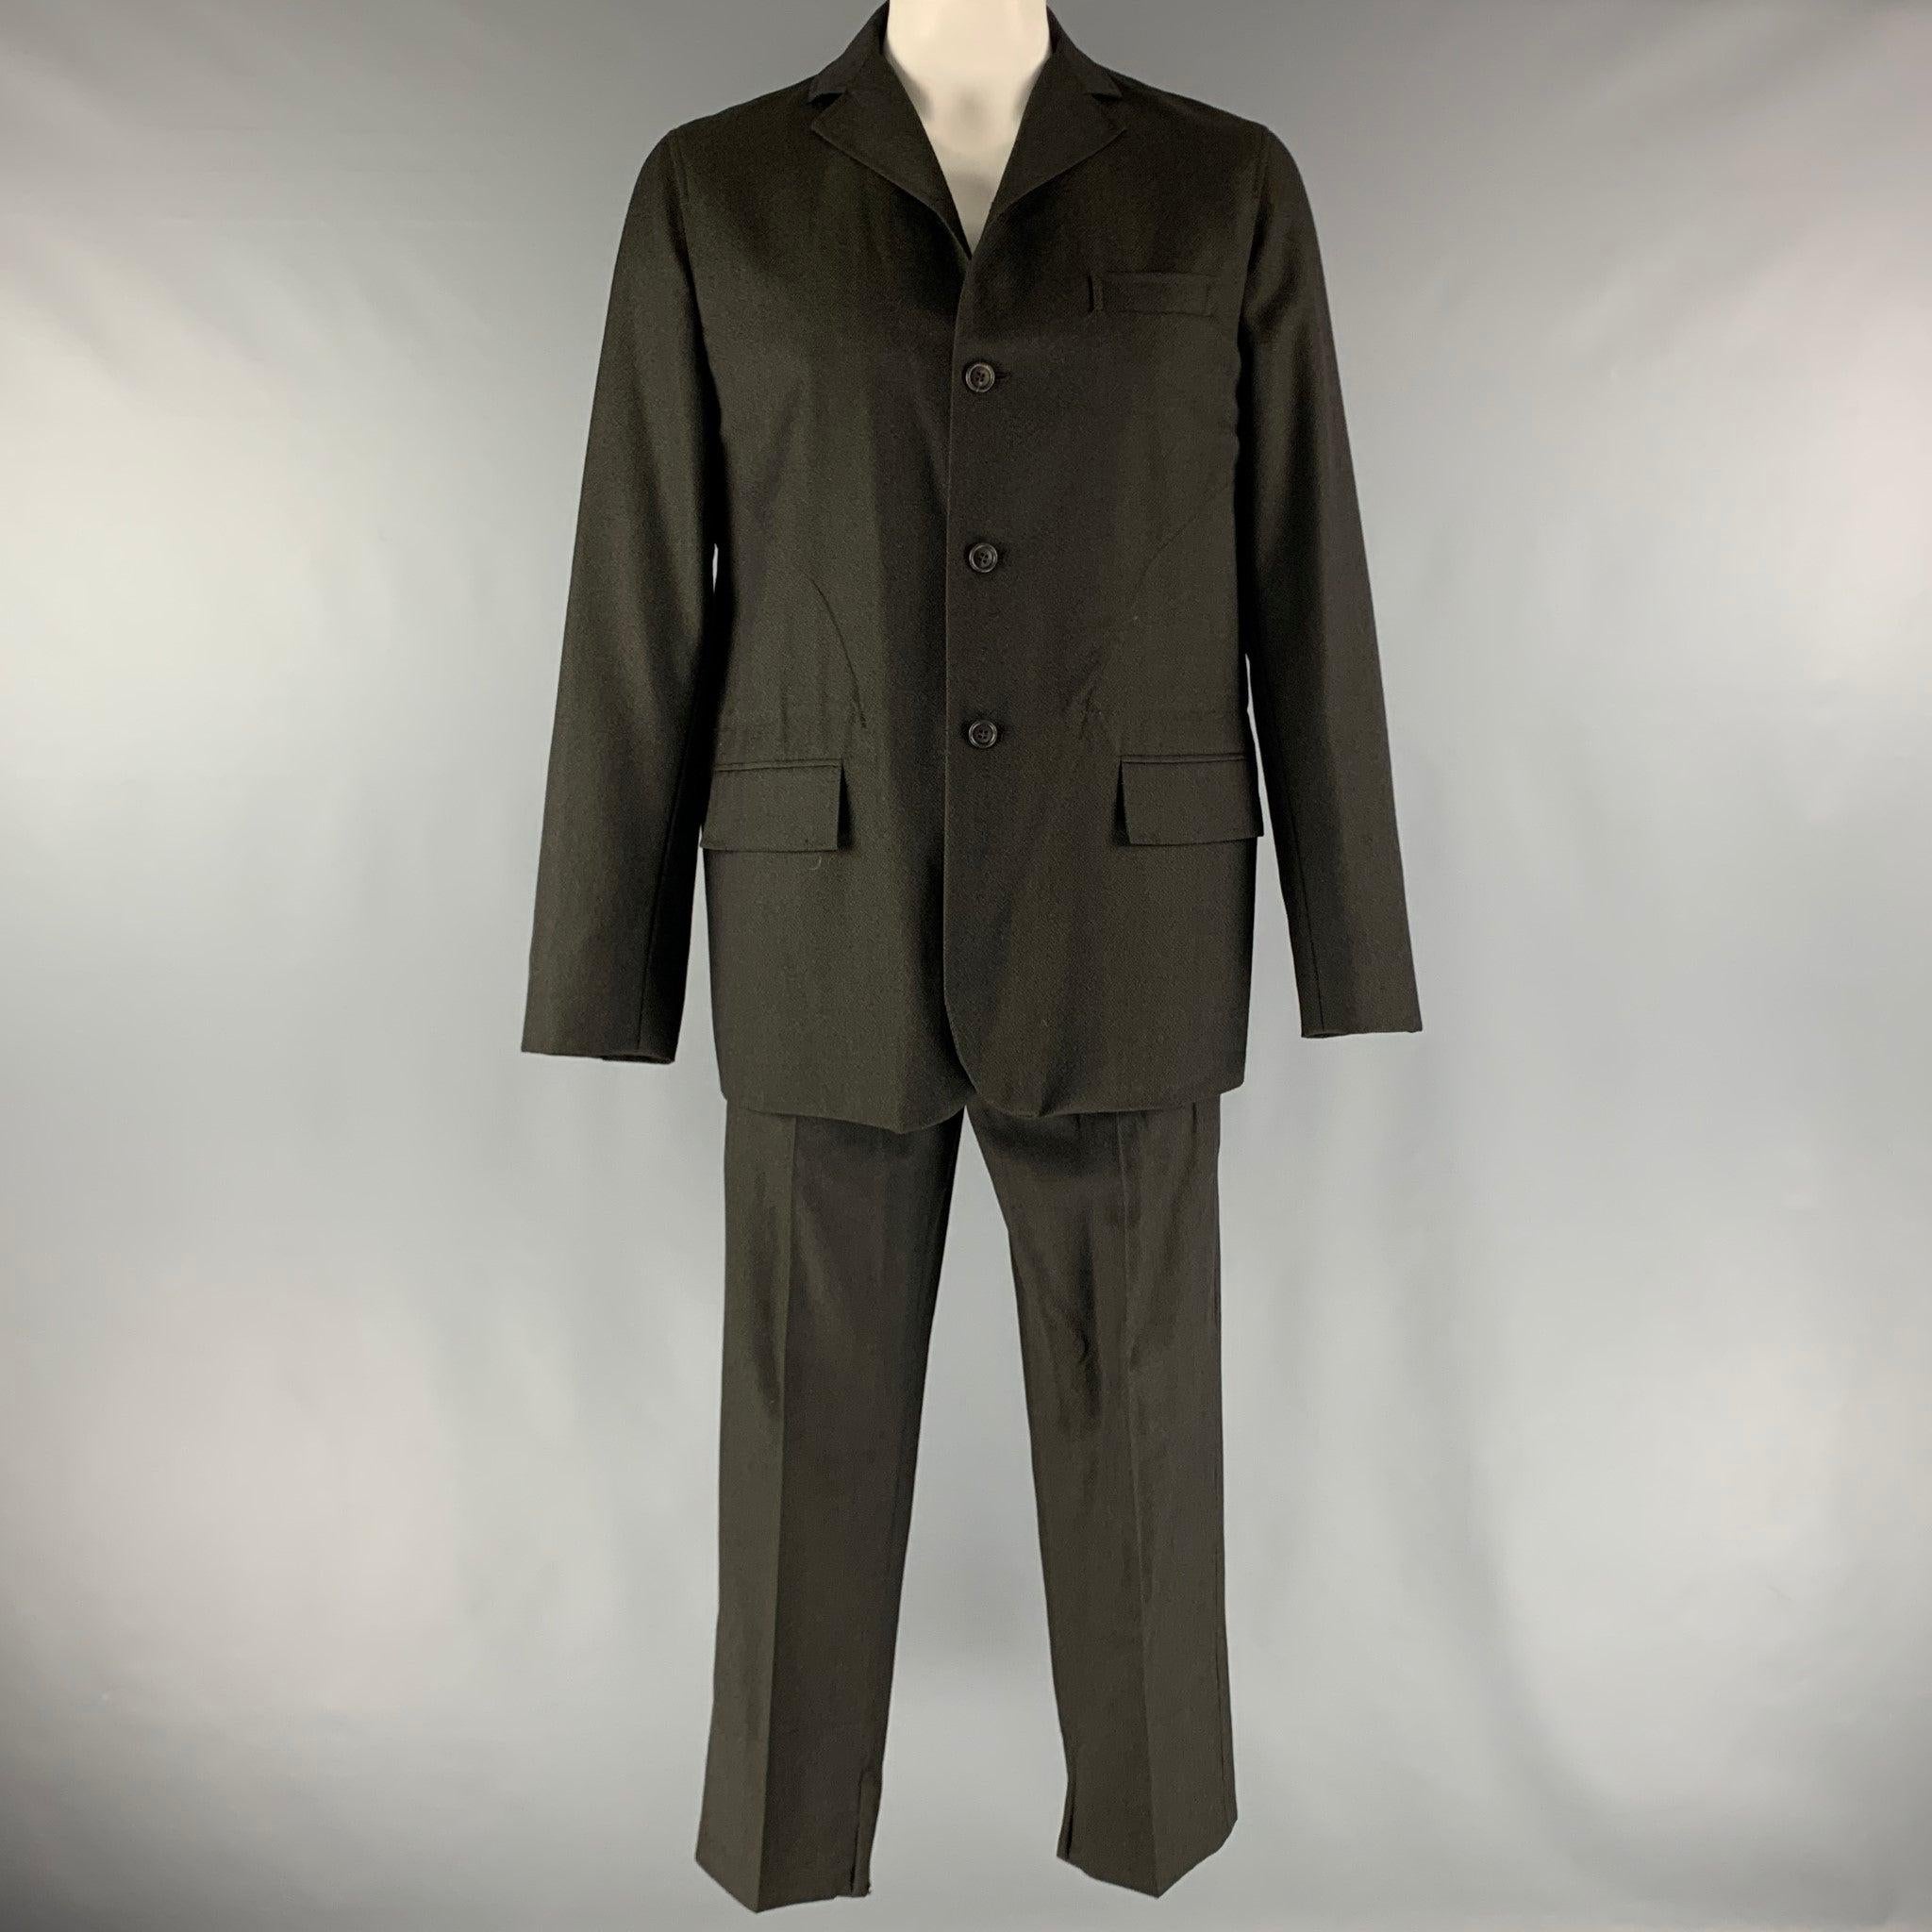 DOLCE & GABBANA suit comes in a black wool twill material with a no liner and includes a single breasted, four button sport coat with a notch lapel, flap pockets, zipper cuffs, and matching flat front trousers. Made in Italy.Good Pre-Owned